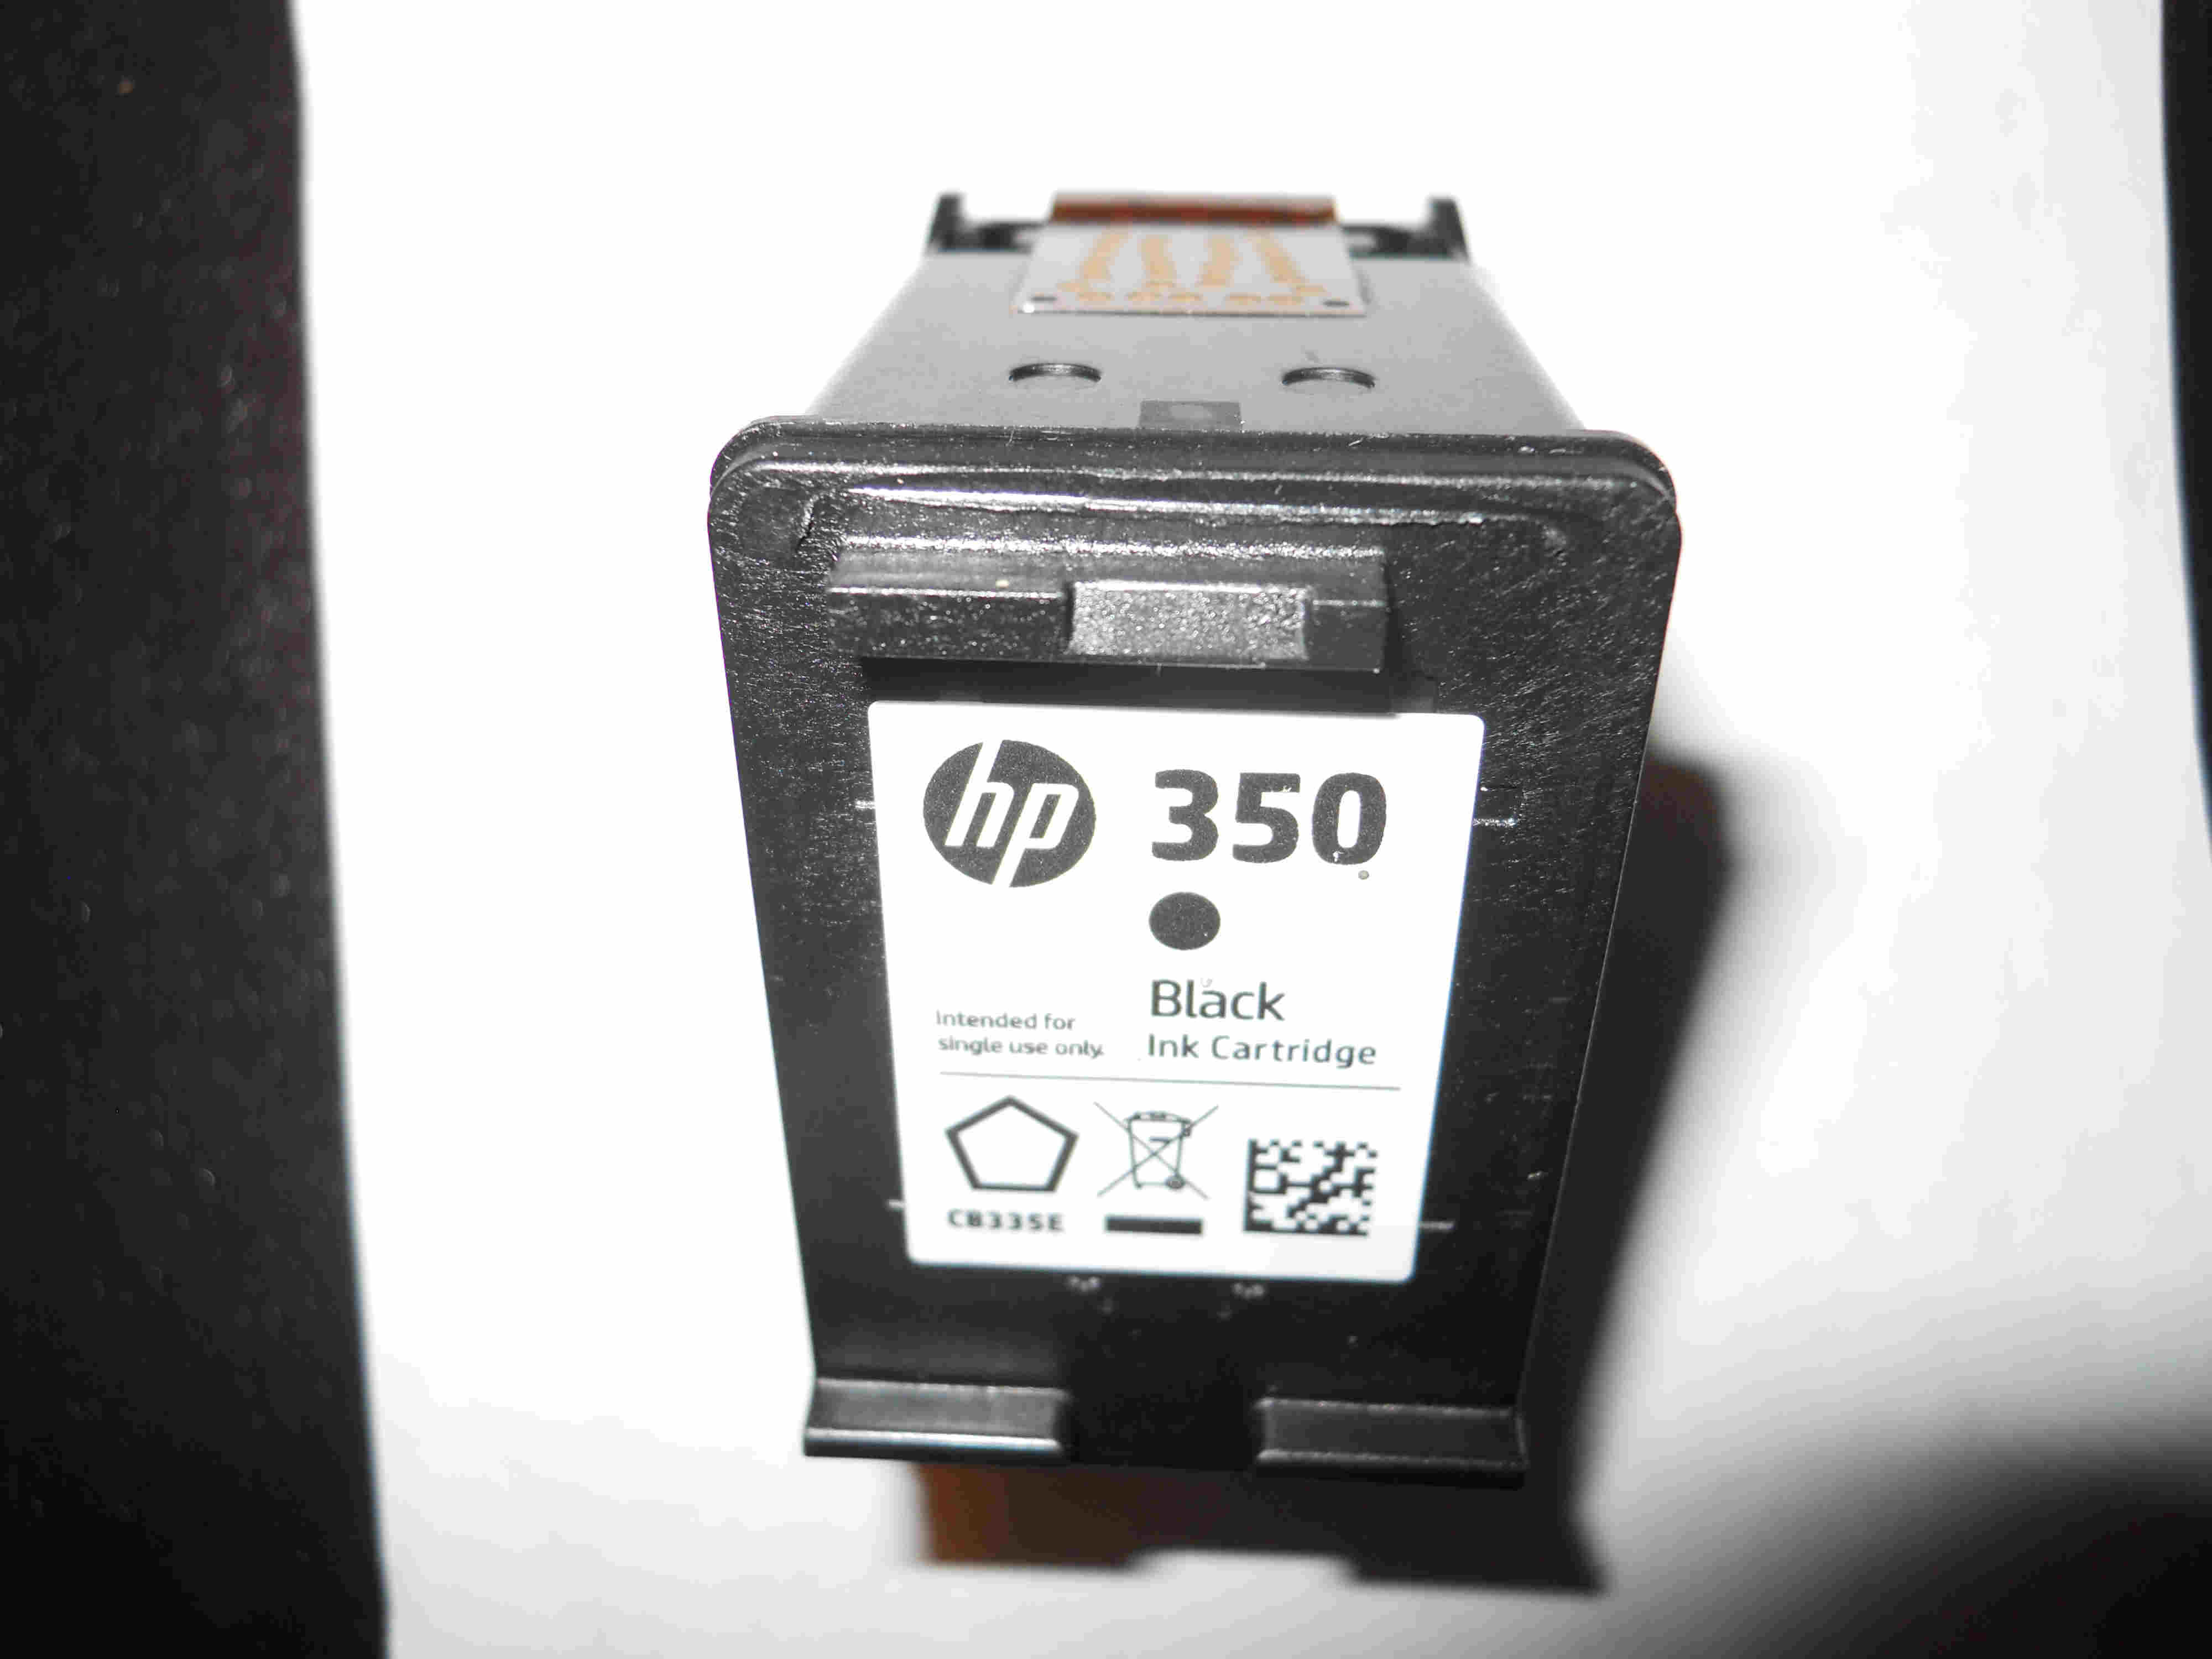 Is my Hp 350 cartridge fake? - HP Support Community - 7340044